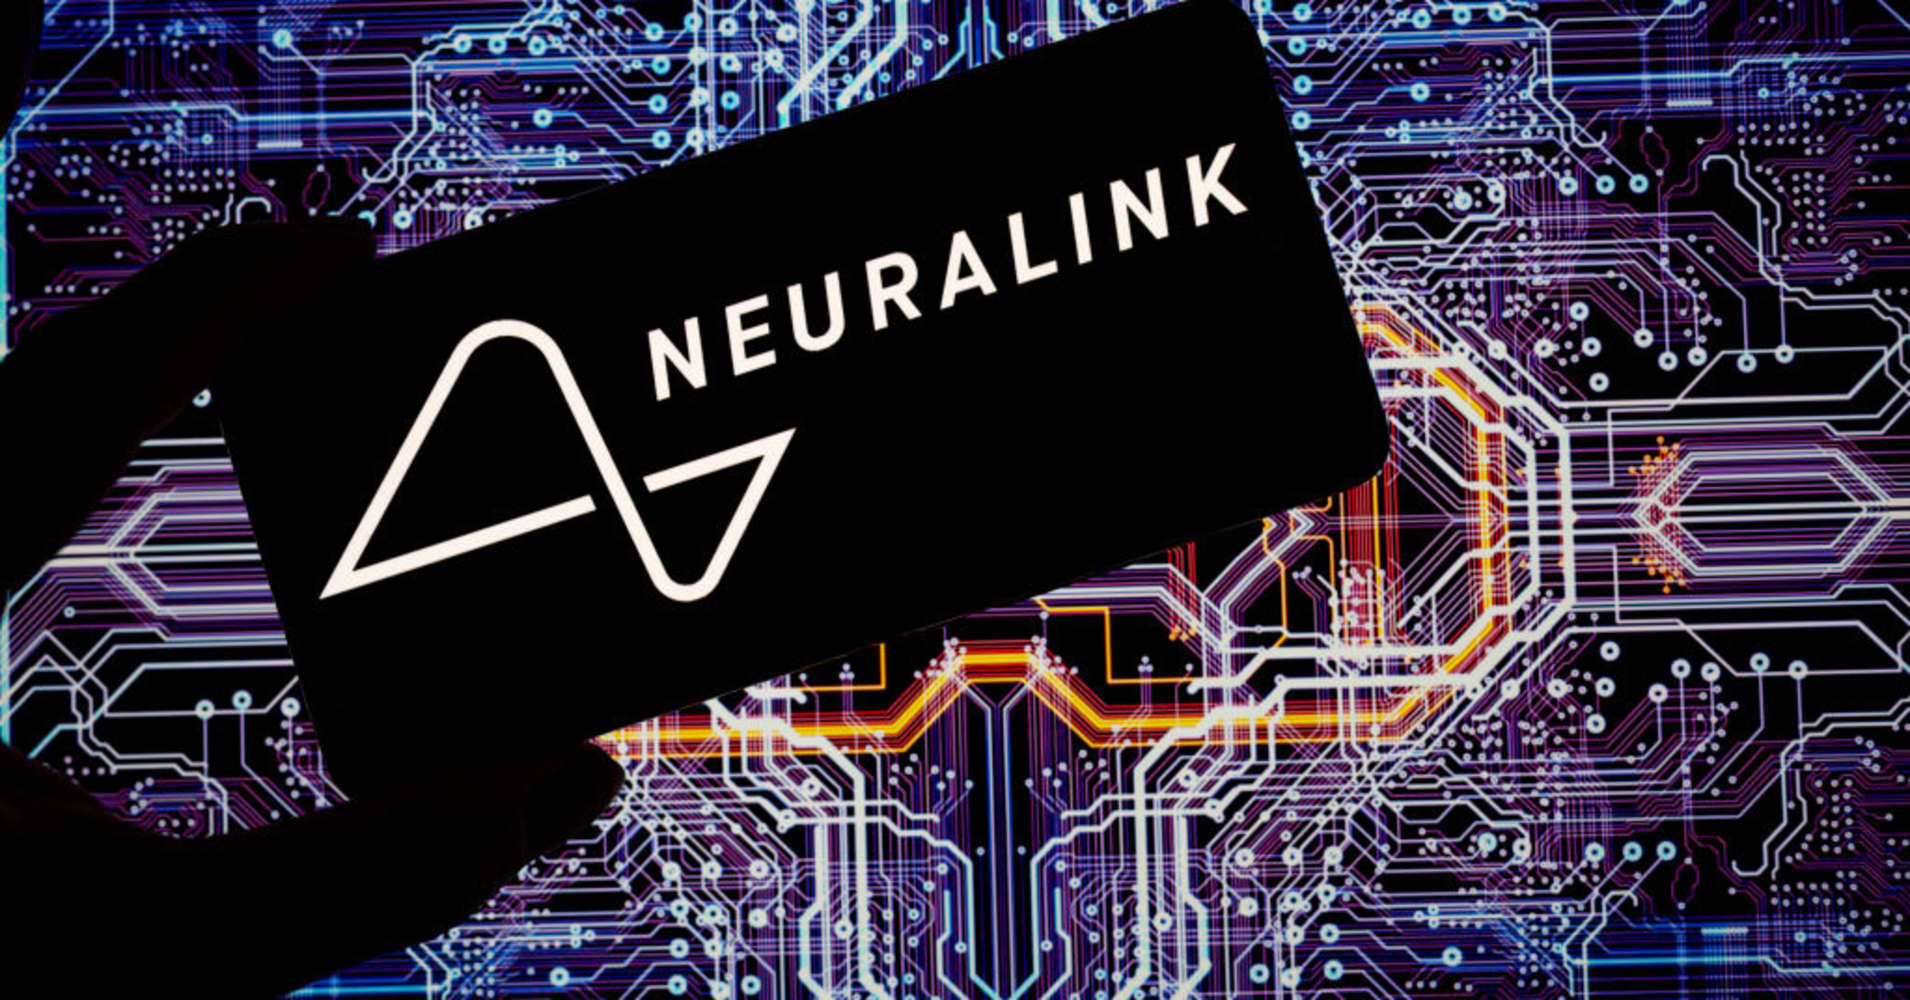 neuralink's first in-human brain implant has experienced a problem, company says